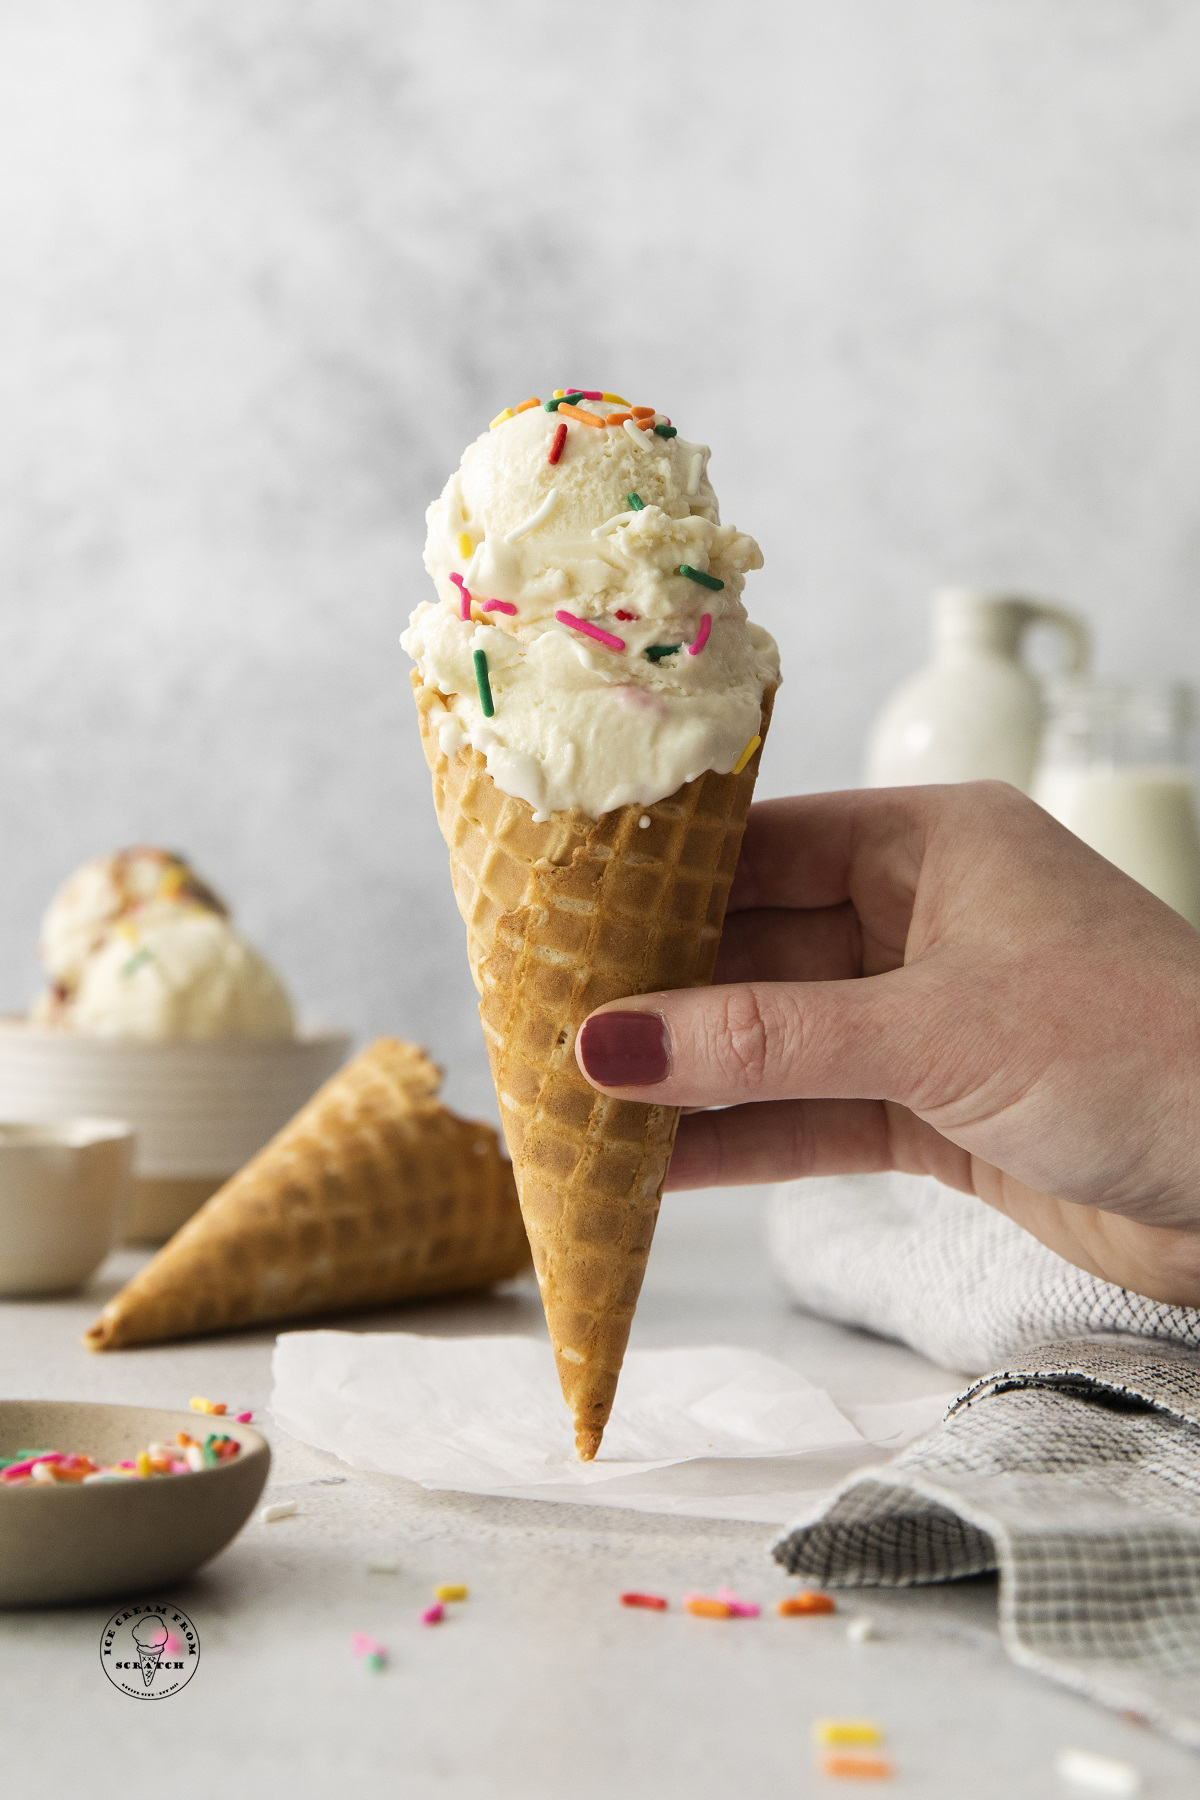 Anabolic vanilla ice cream in a sugar cone, topped with sprinkles, held by a hand.